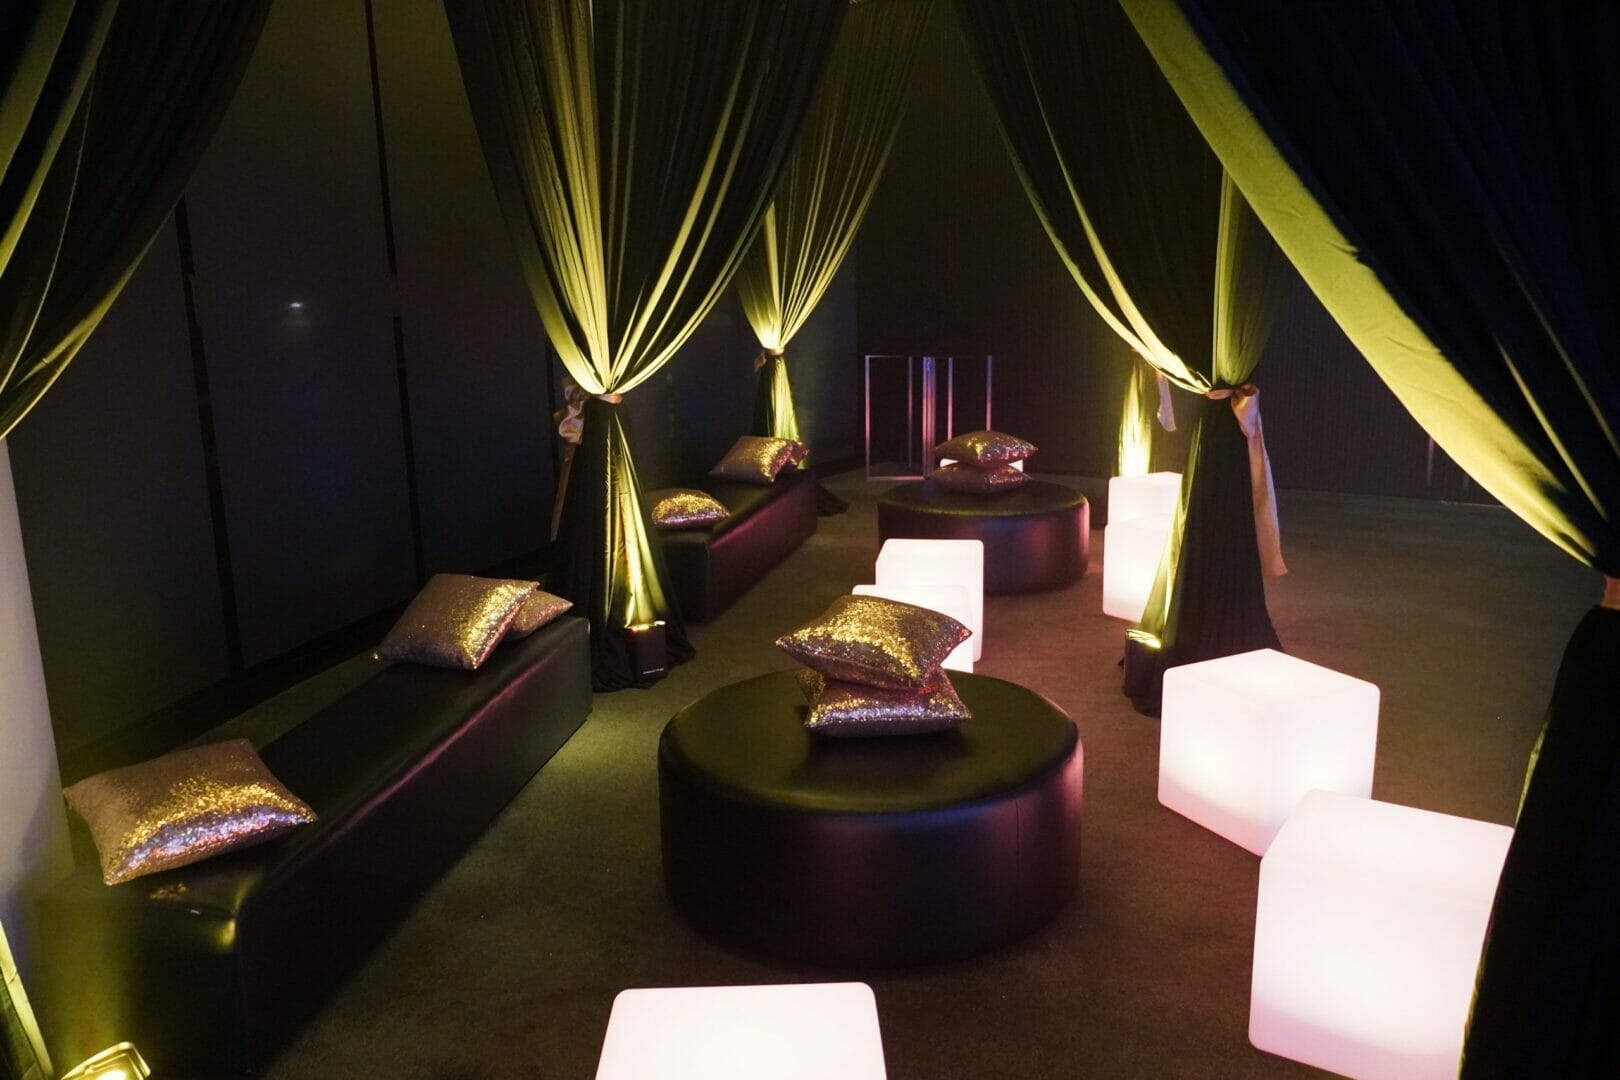 studio 54 themed event lounge area with ottomans draping and illuminated seats